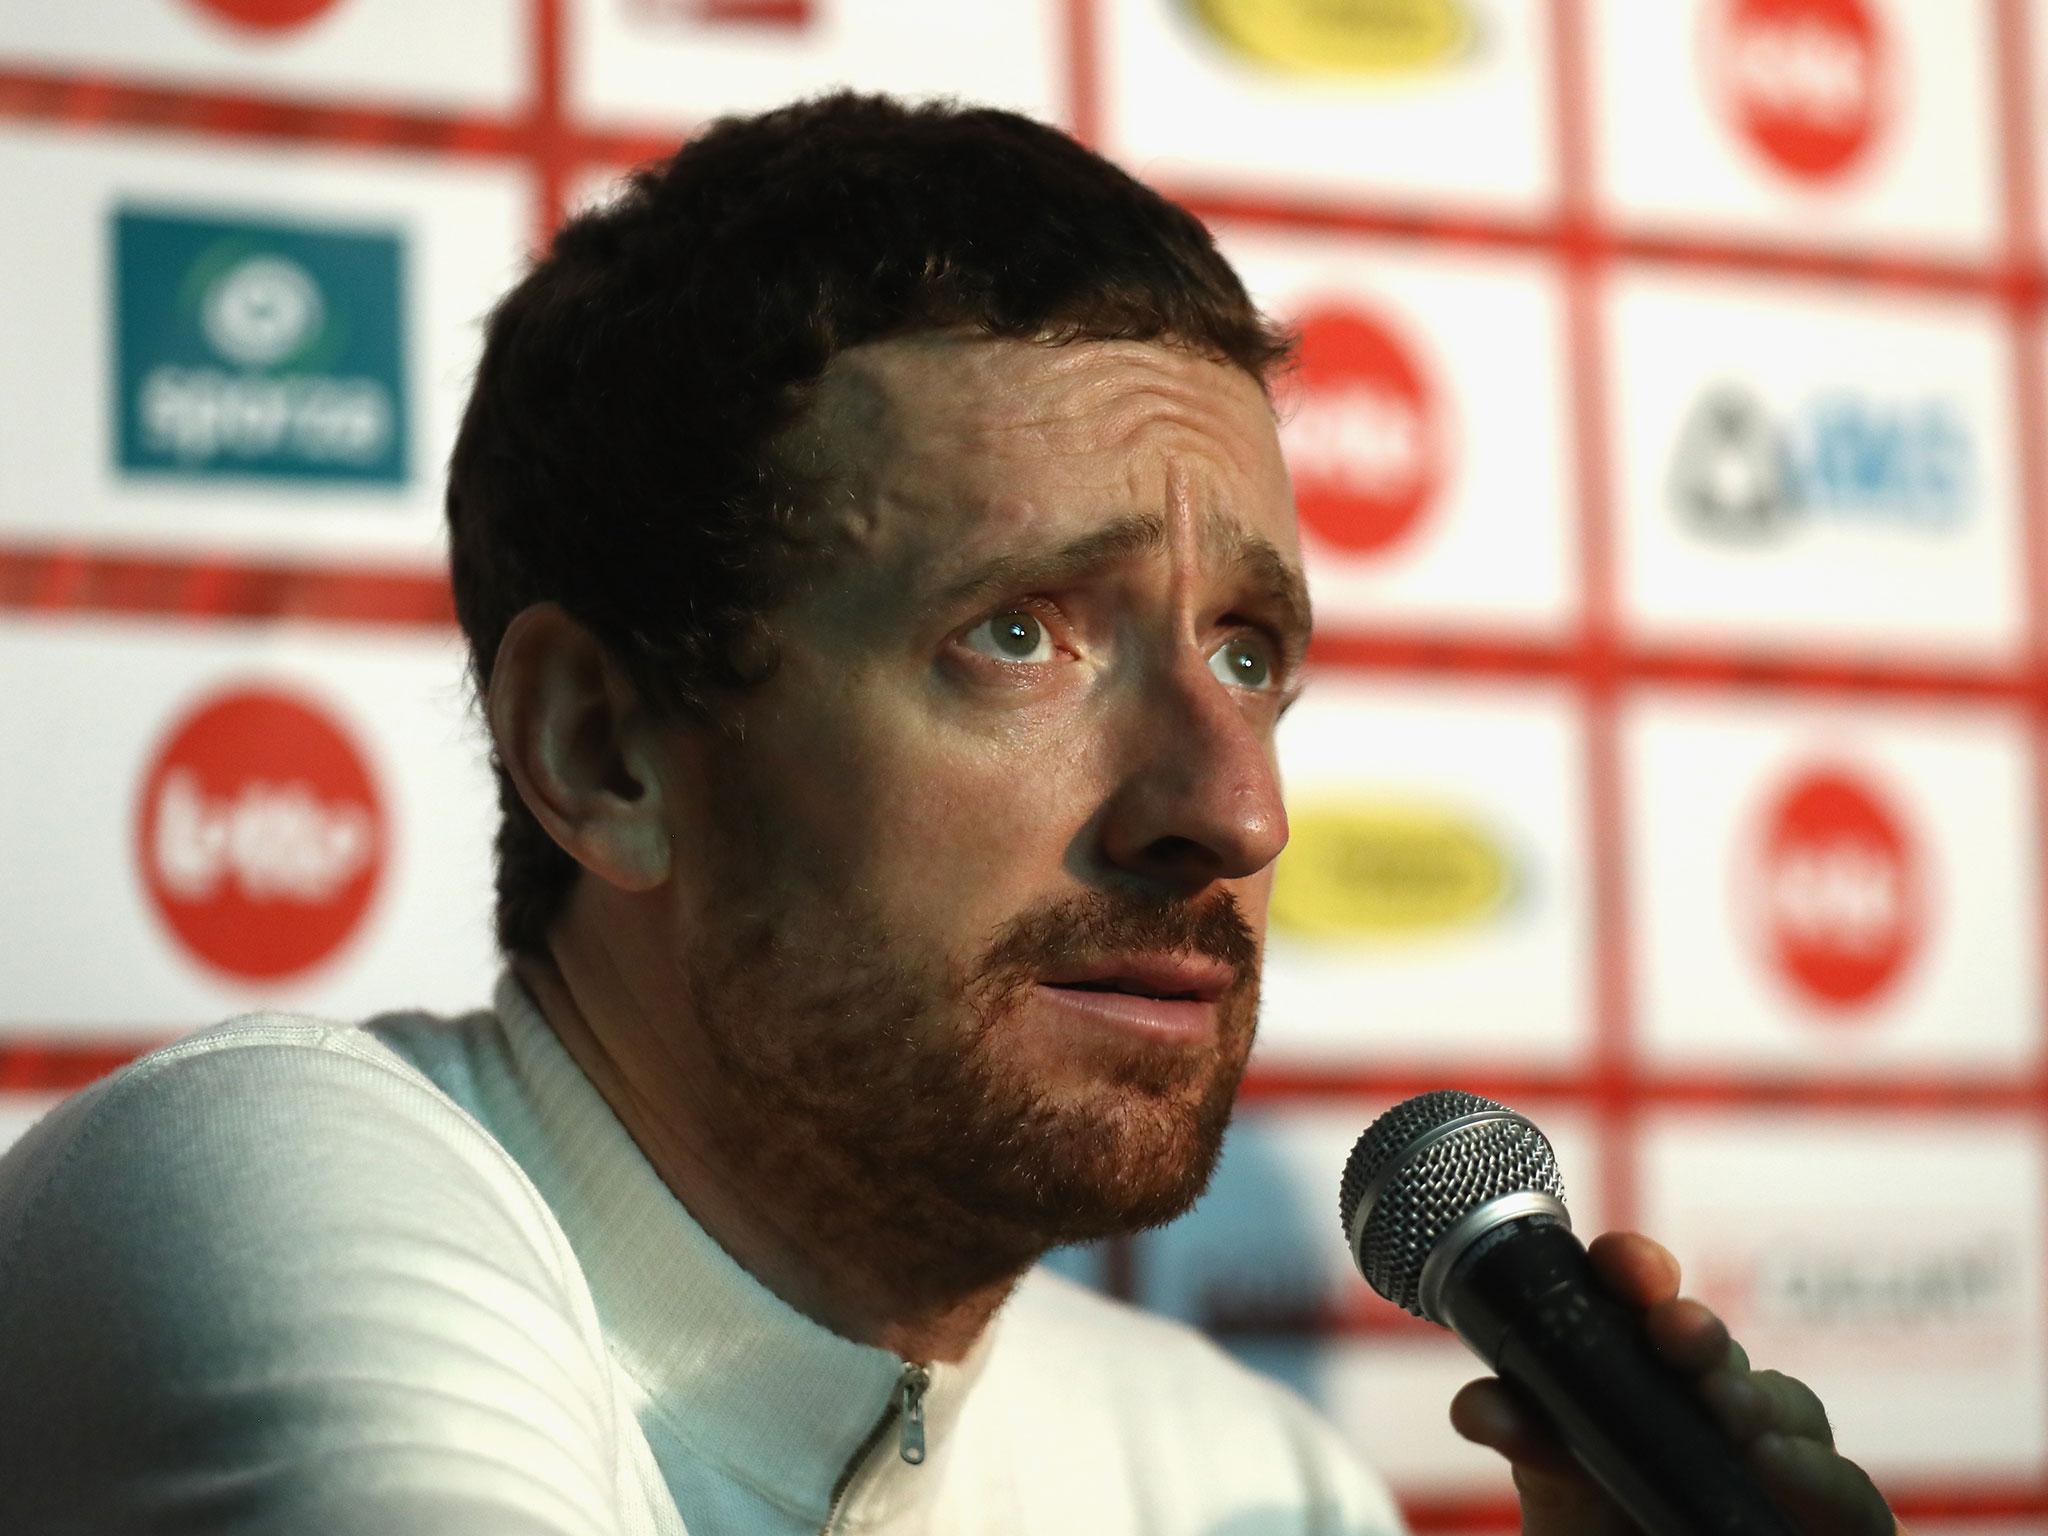 Bradley Wiggins received a delivery of Fluimicil in a 'mystery package' in 2011, says Dave Brailsford